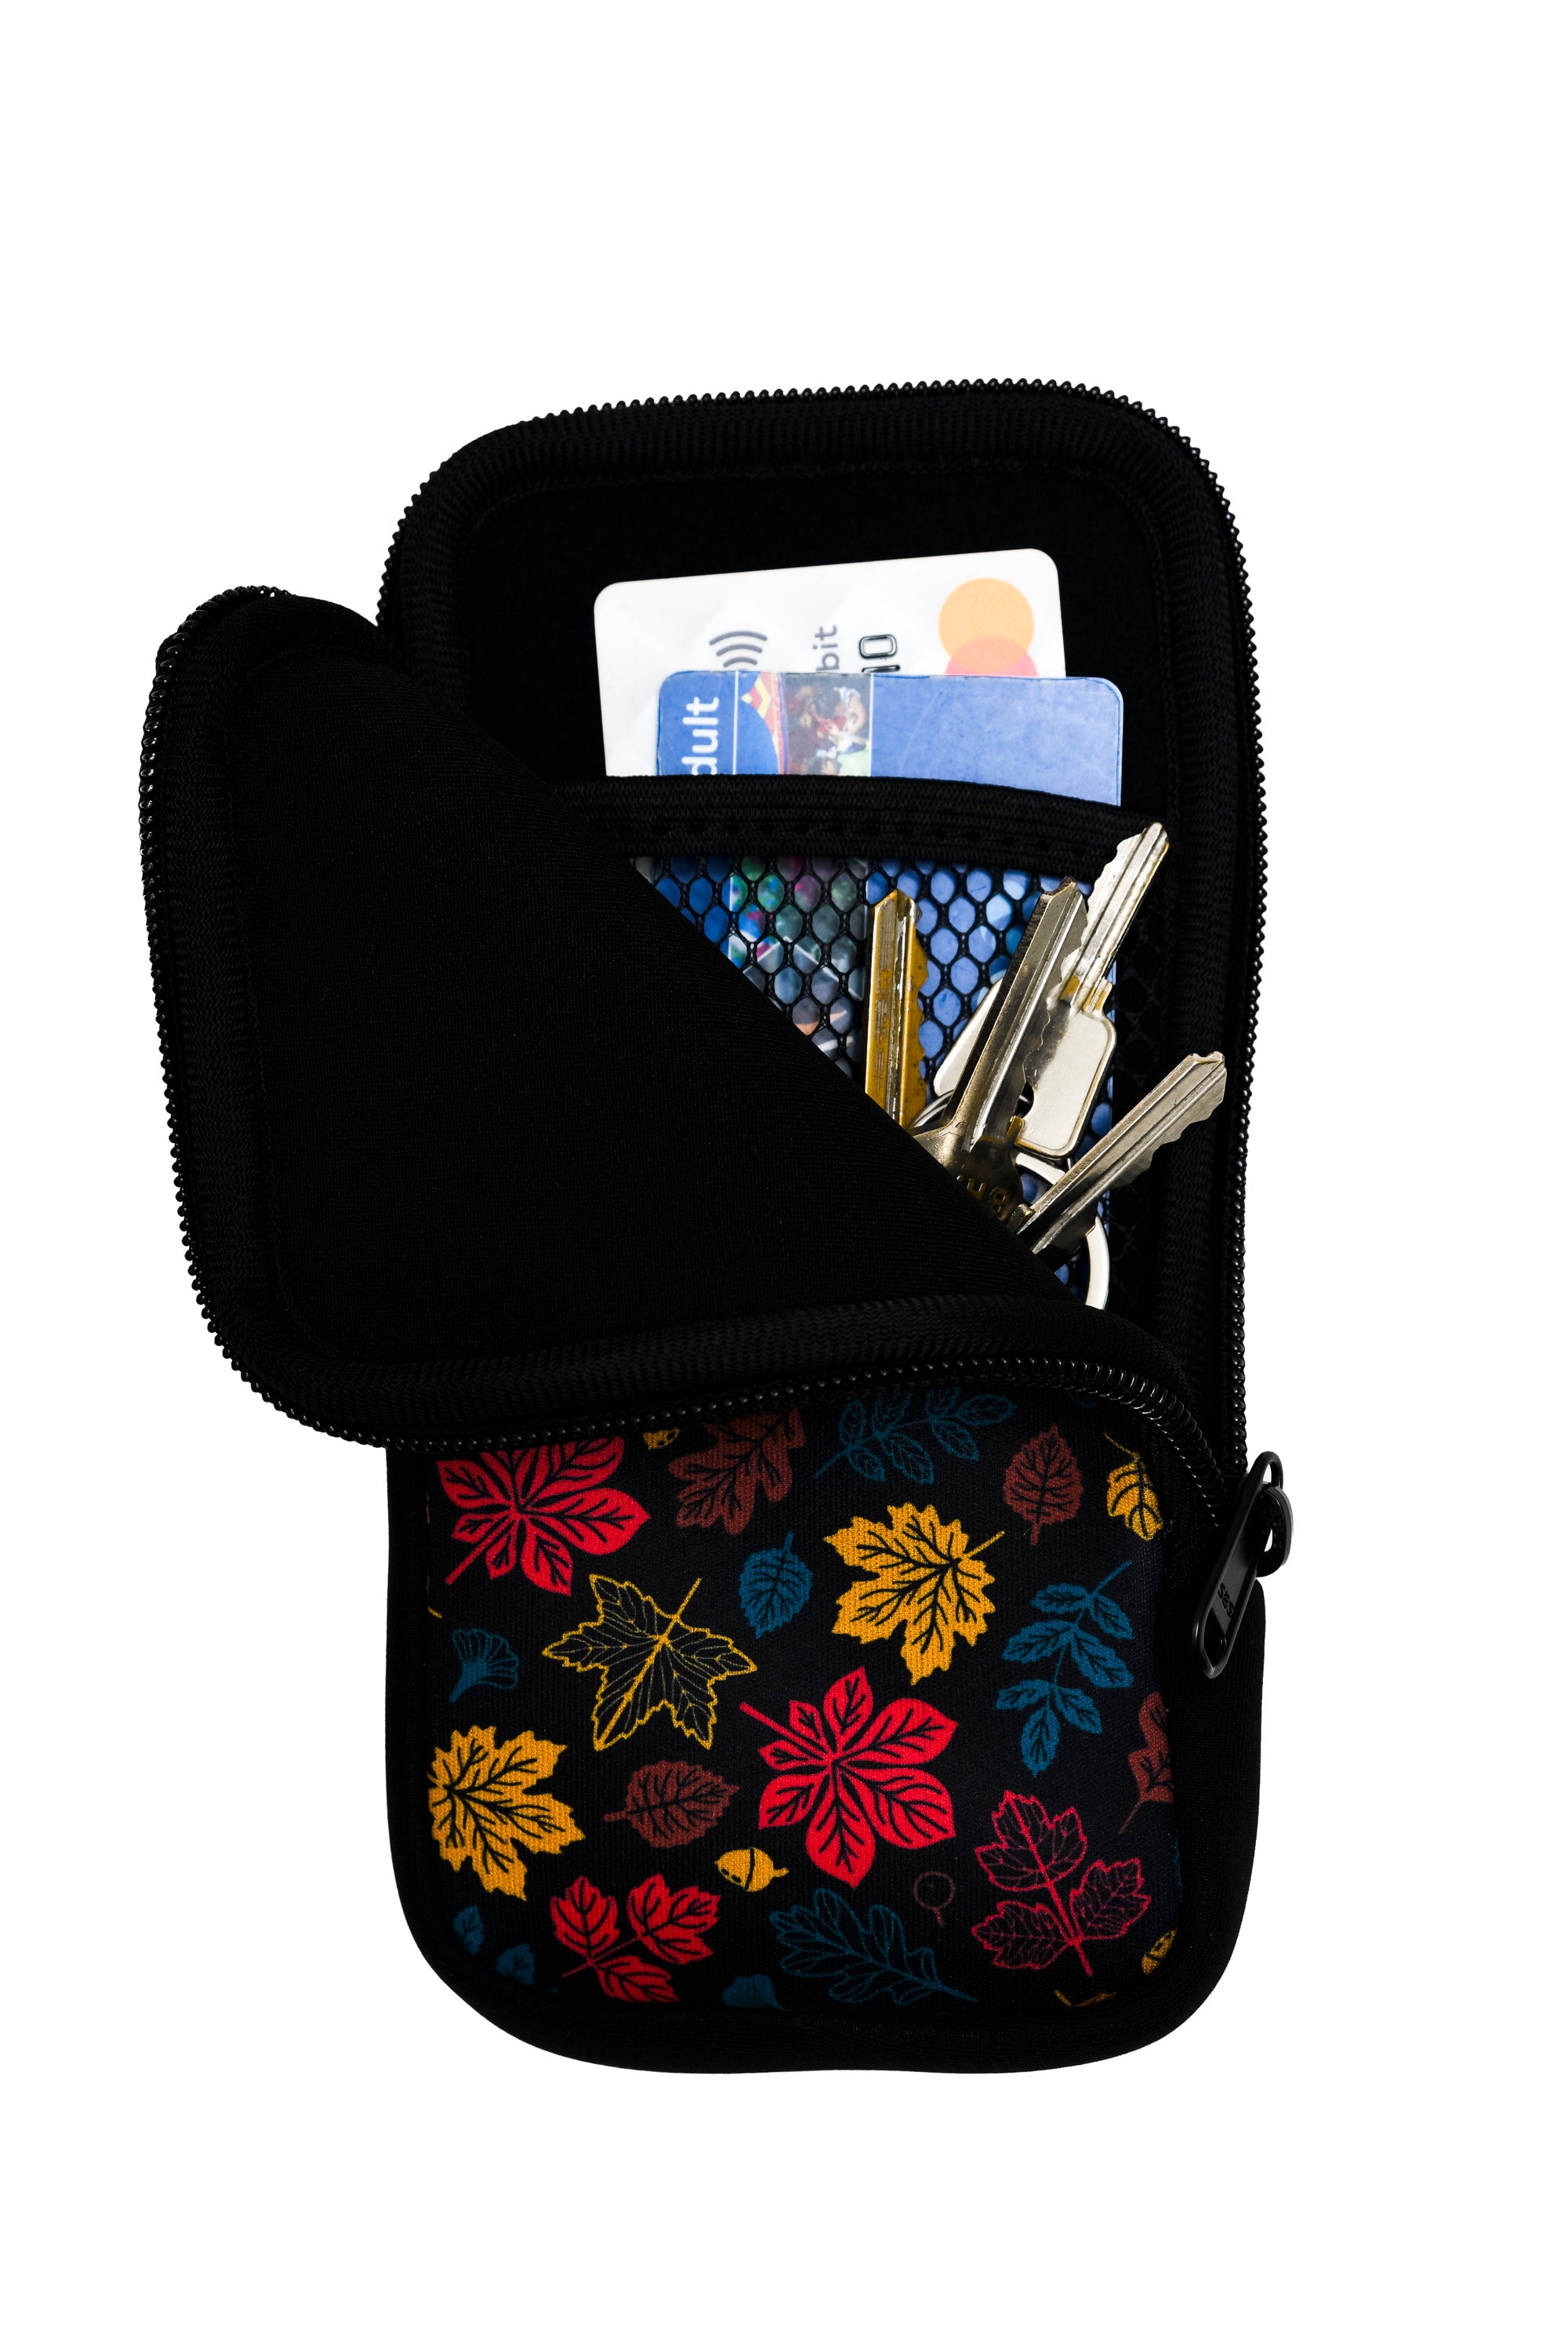 Travel Pouch with Detachable Lanyard - Autumn Leaves